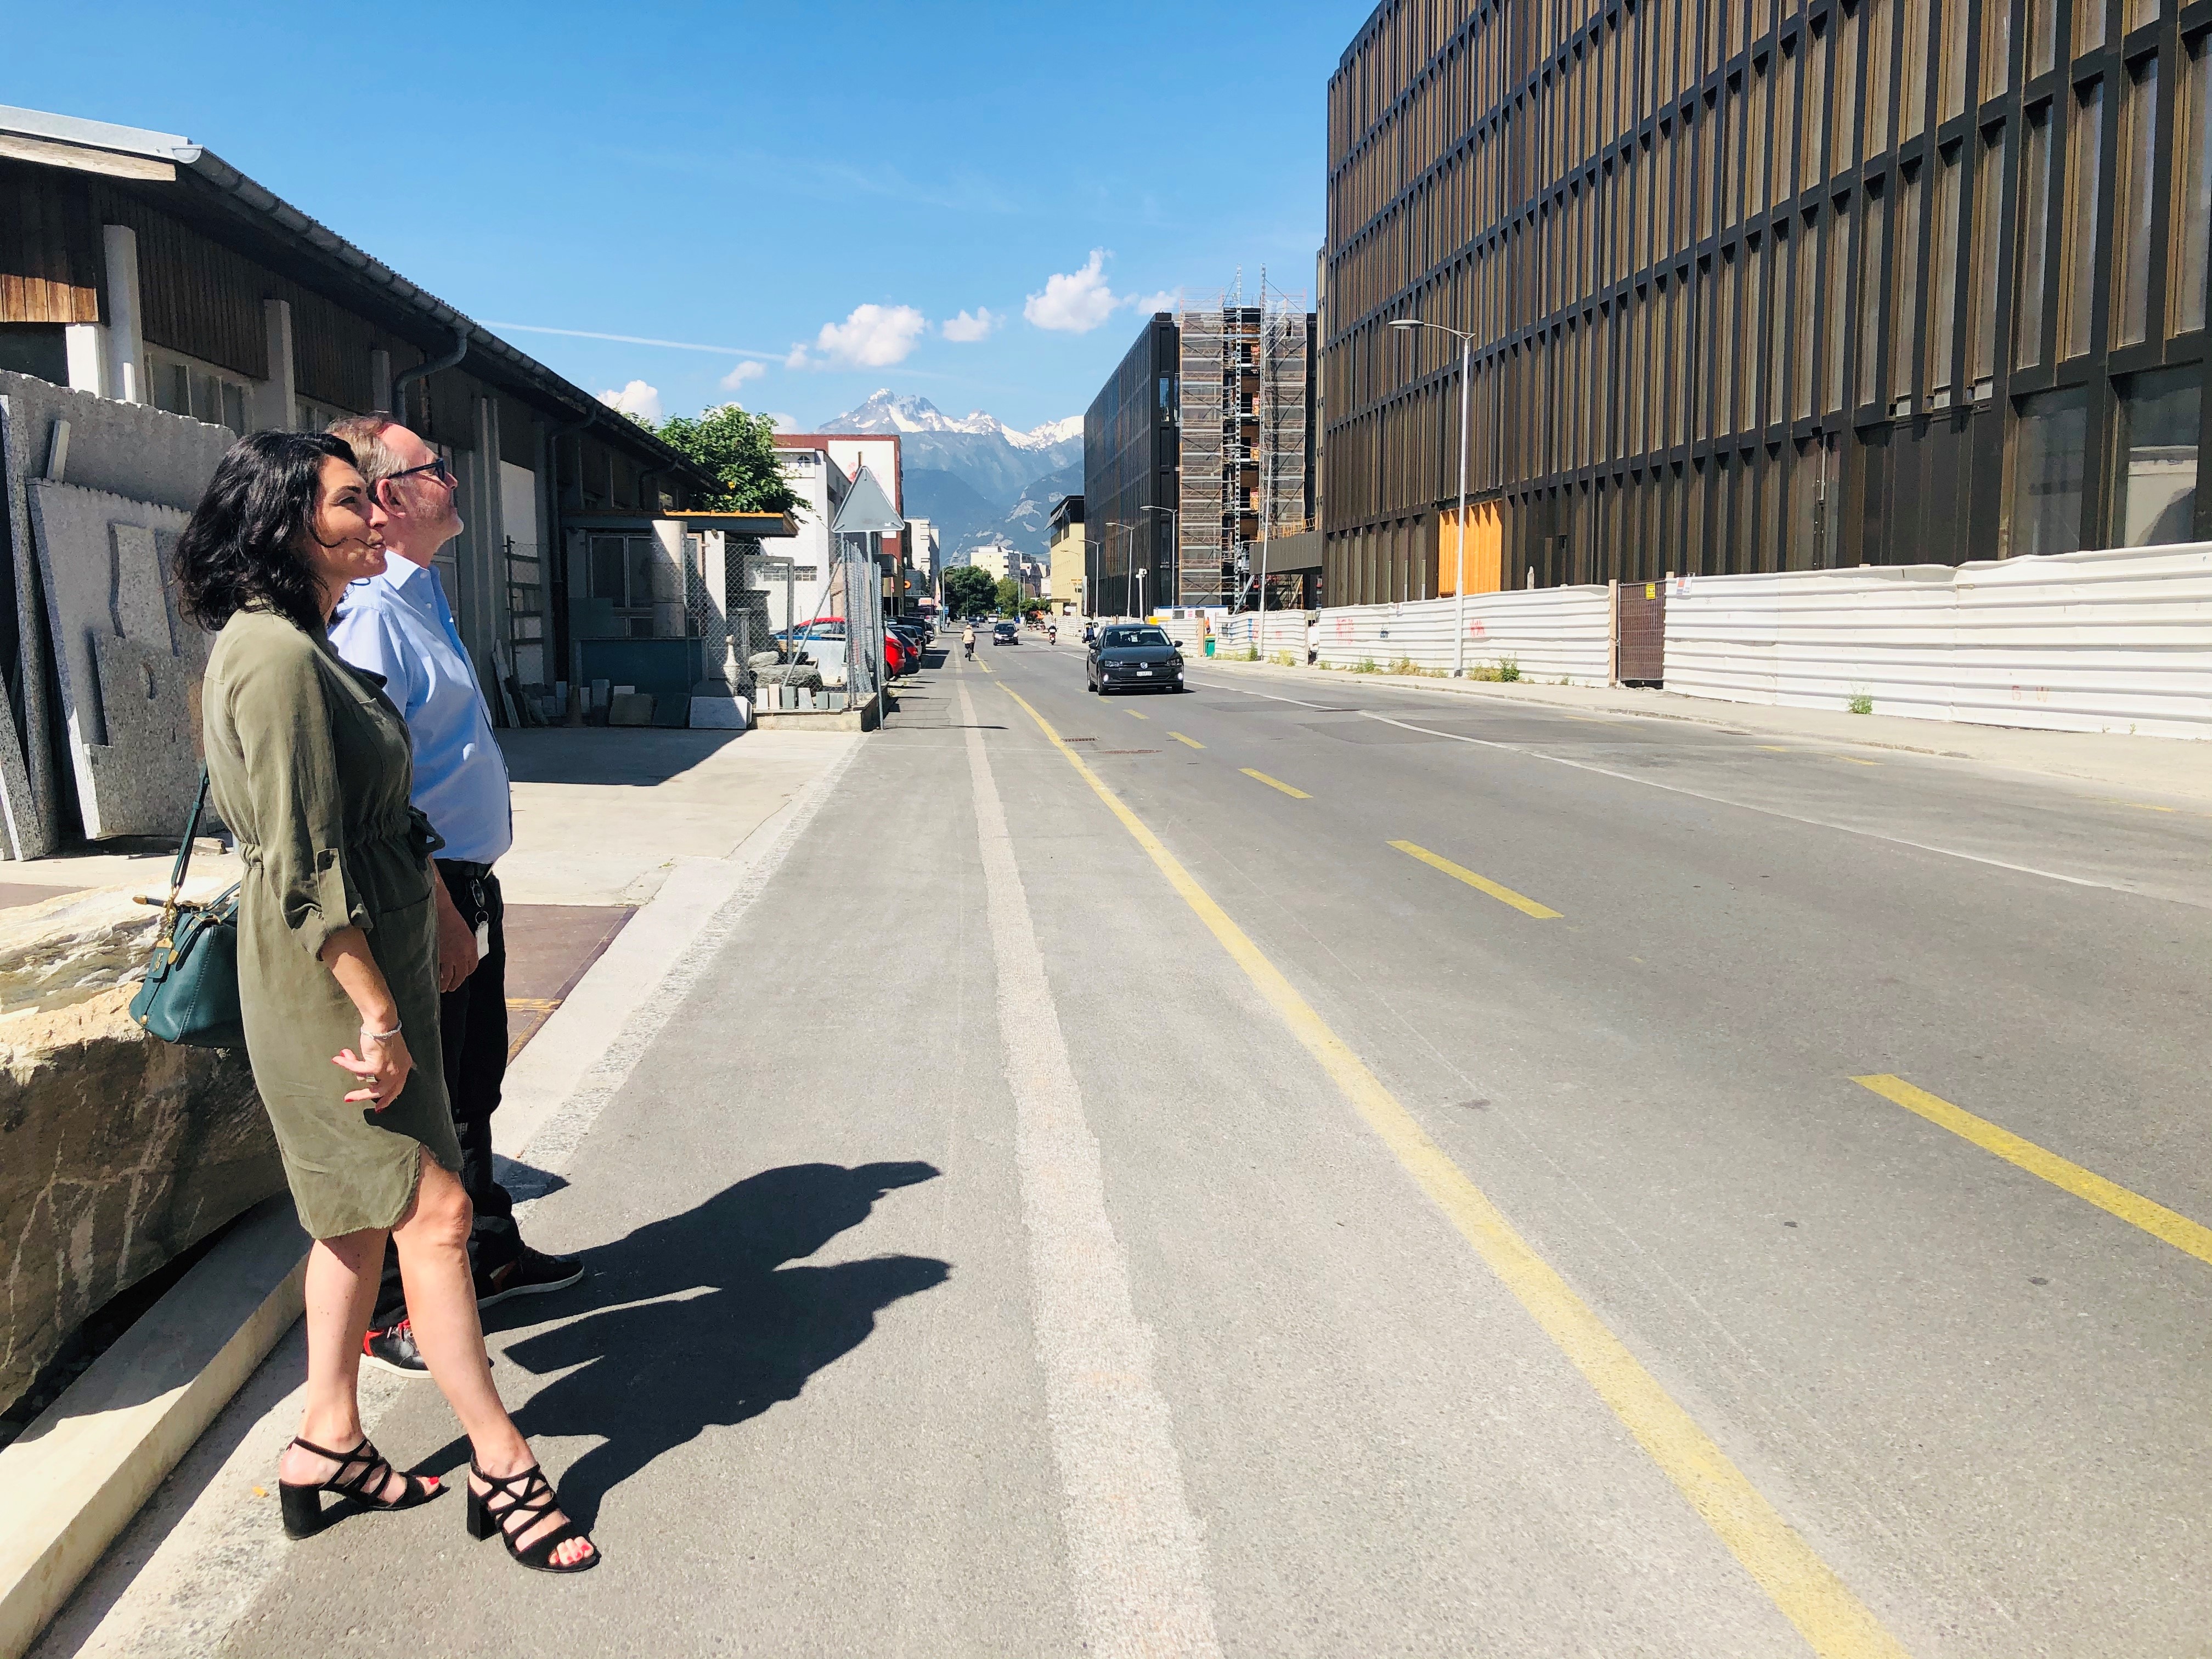 Sophia Dini and Marc-André Berclaz in front of the Energypolis campus. Sophia Dini, the Valais cantonal delegate for the economy and innovation, and Marc-André Berclaz, the operational director of EPFL Valais Wallis are in charge of the Energypolis campus. 